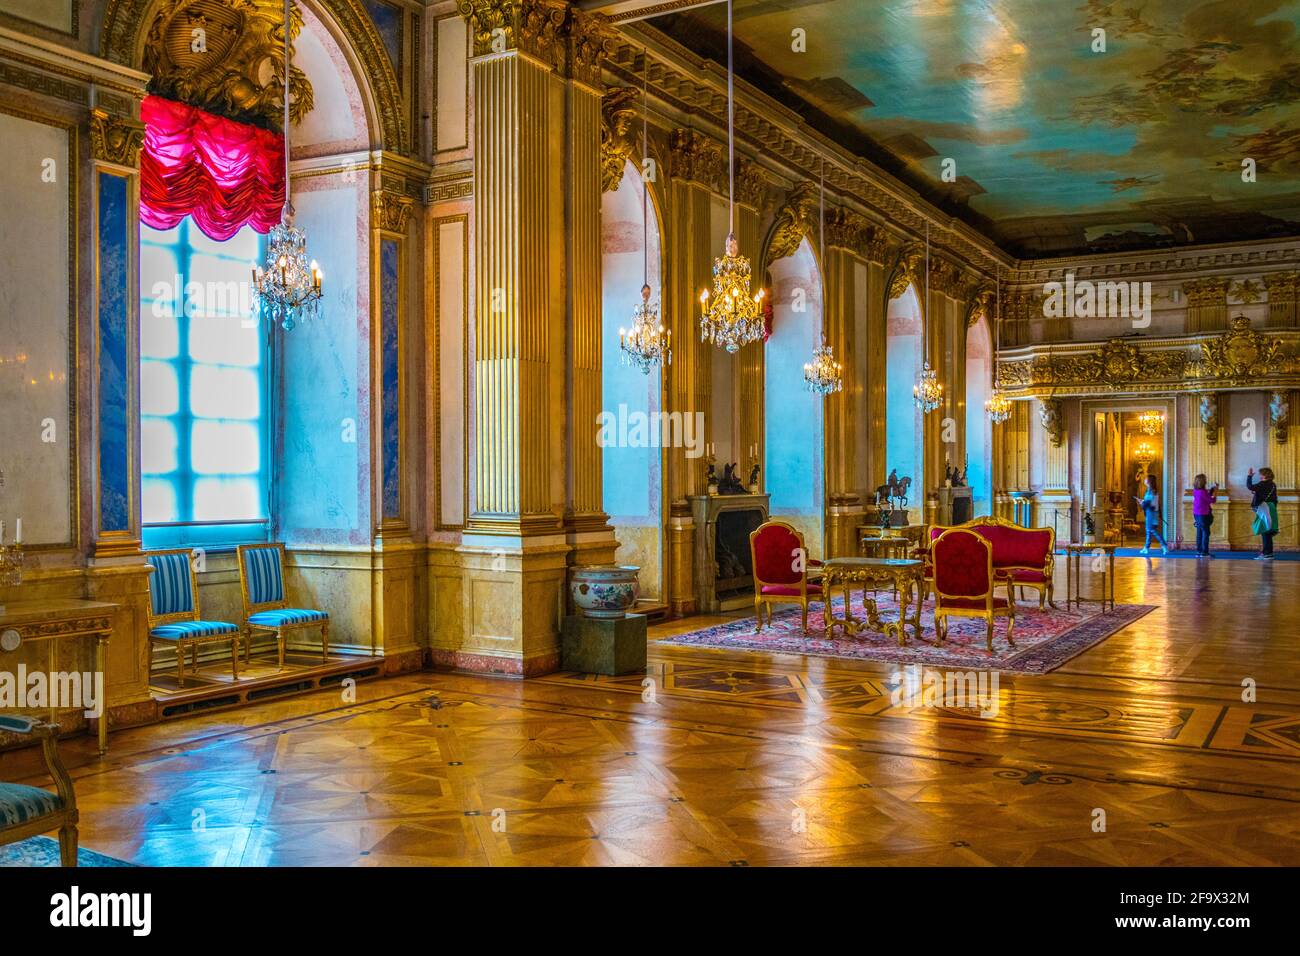 STOCKHOLM, SWEDEN, AUGUST 18, 2016: View of a hall of the Kungliga slottet castle in Gamla Stan, Stockholm, Sweden Stock Photo